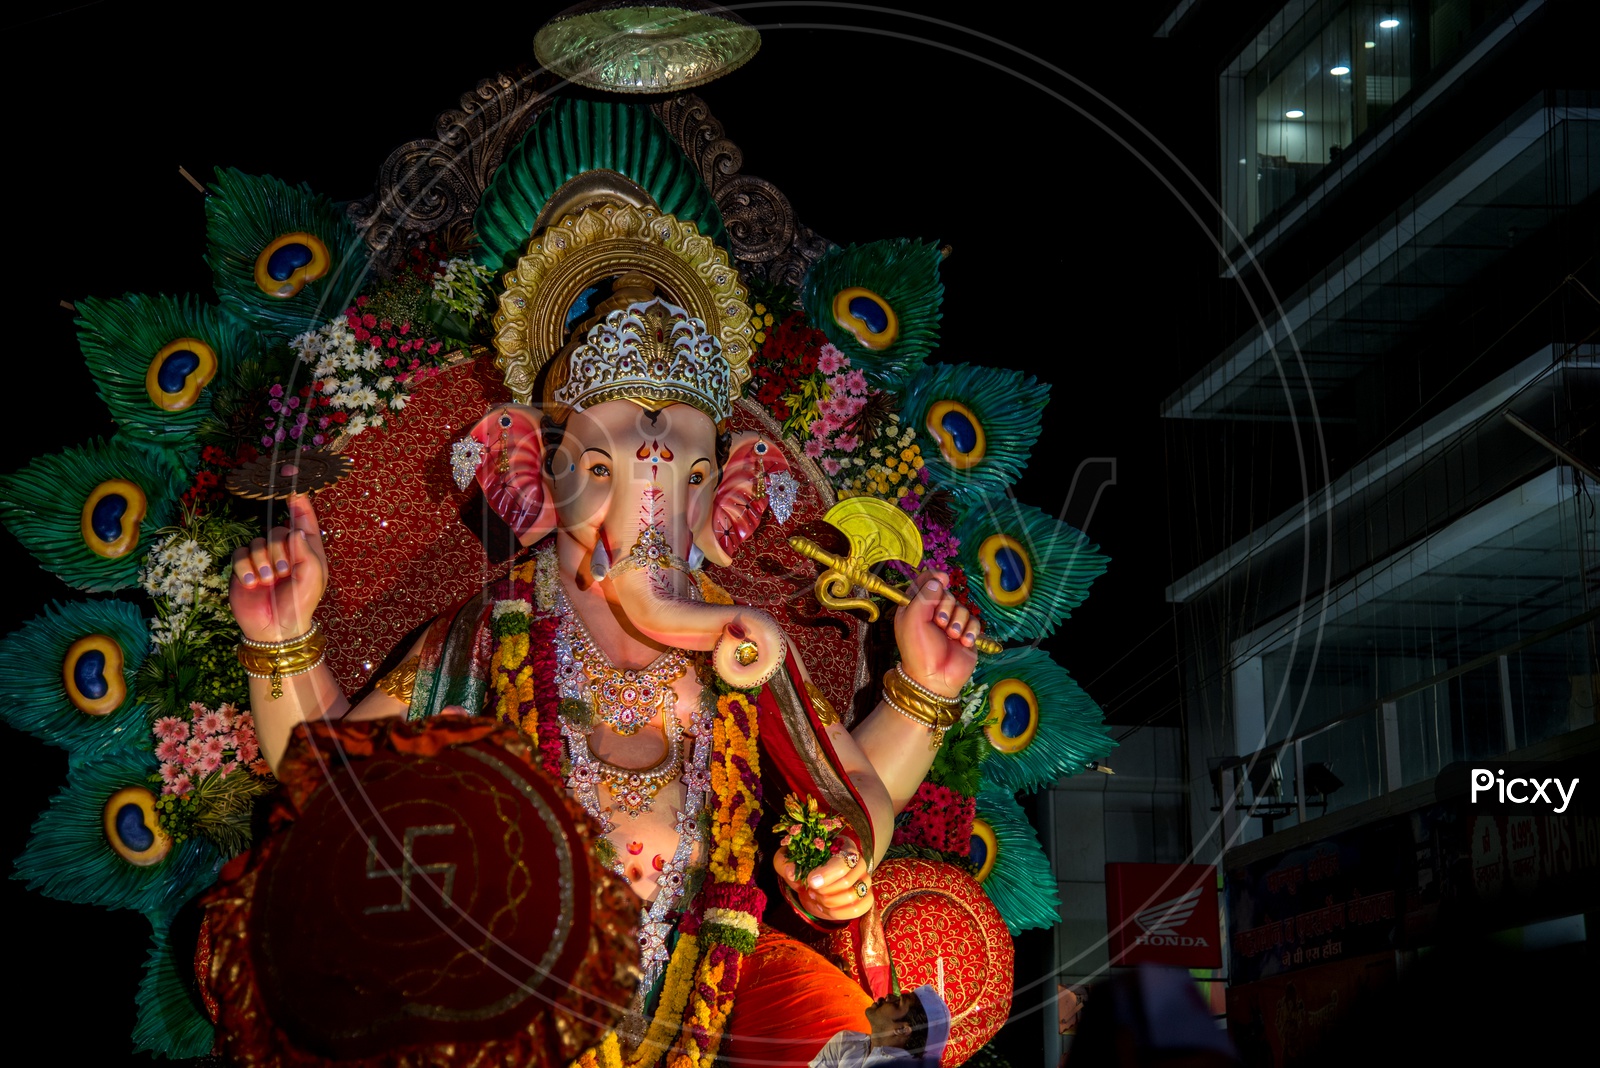 Lord Ganesh Idols In Procession During The Immersion Event of Ganesh Chathurdhi Festival